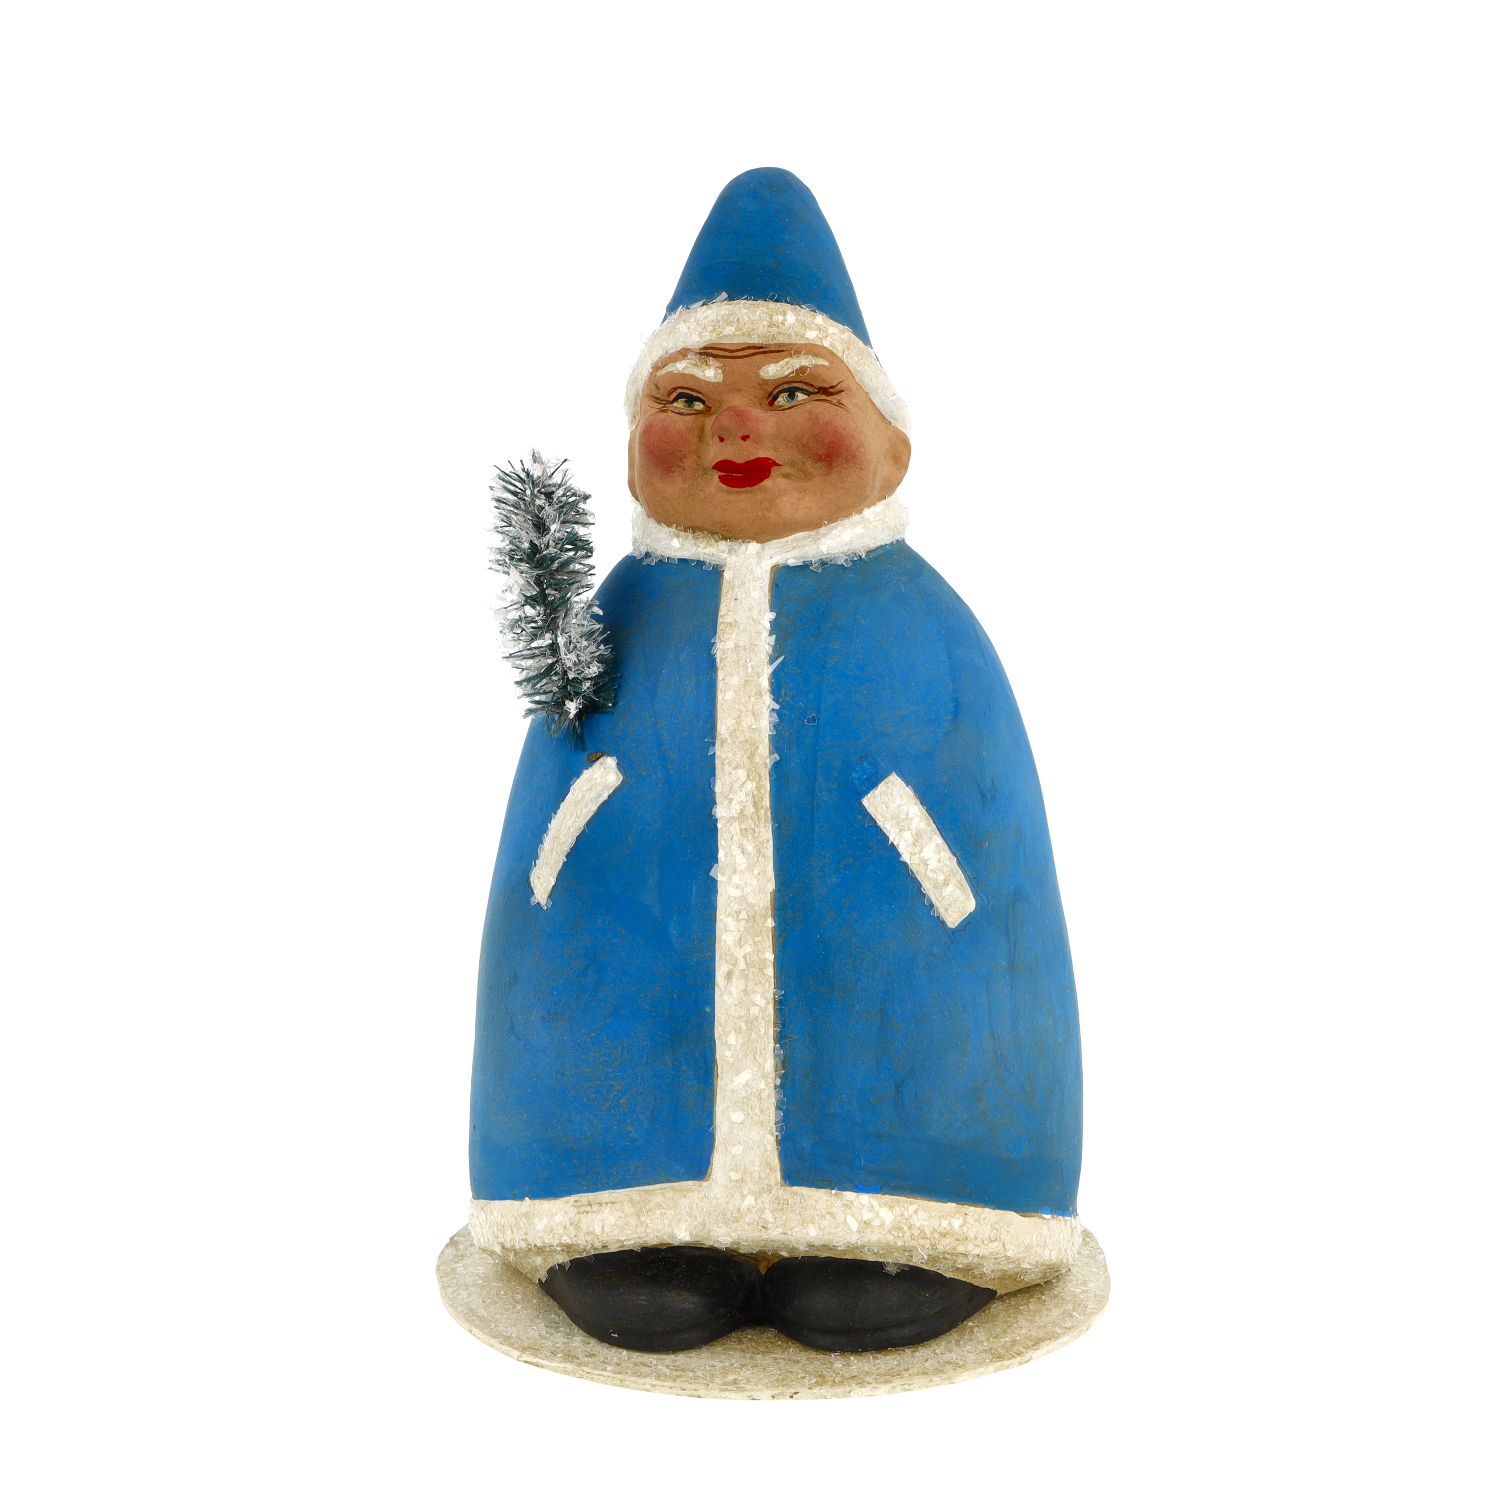 Christmas Prankster with a pointed cap on a round cardboard base, candy container, H = 8 1/4 in., blue